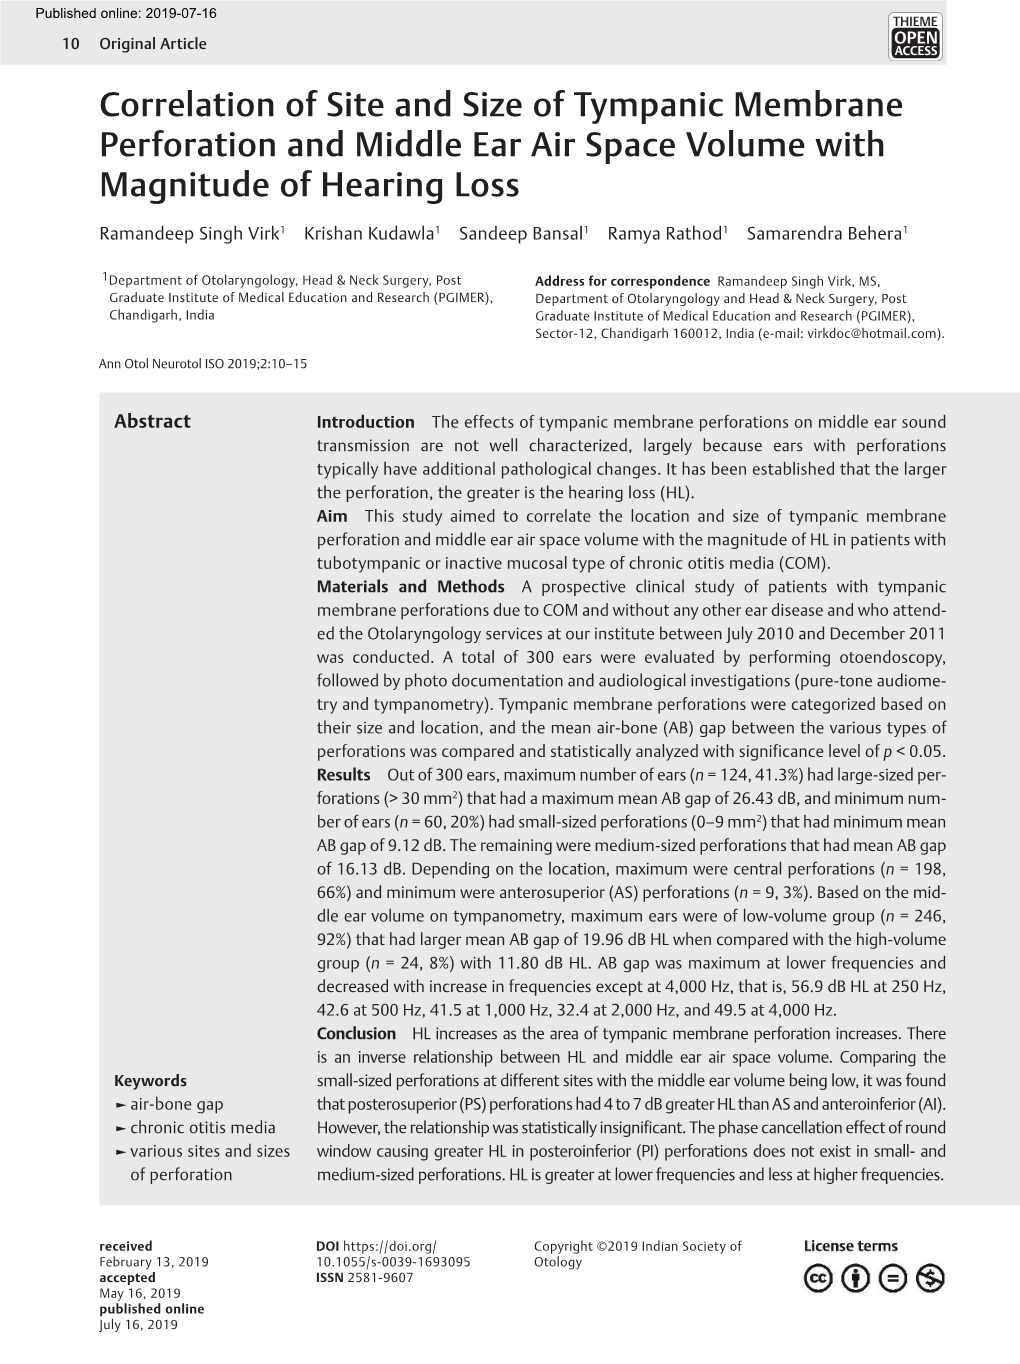 Correlation of Site and Size of Tympanic Membrane Perforation and Middle Ear Air Space Volume with Magnitude of Hearing Loss